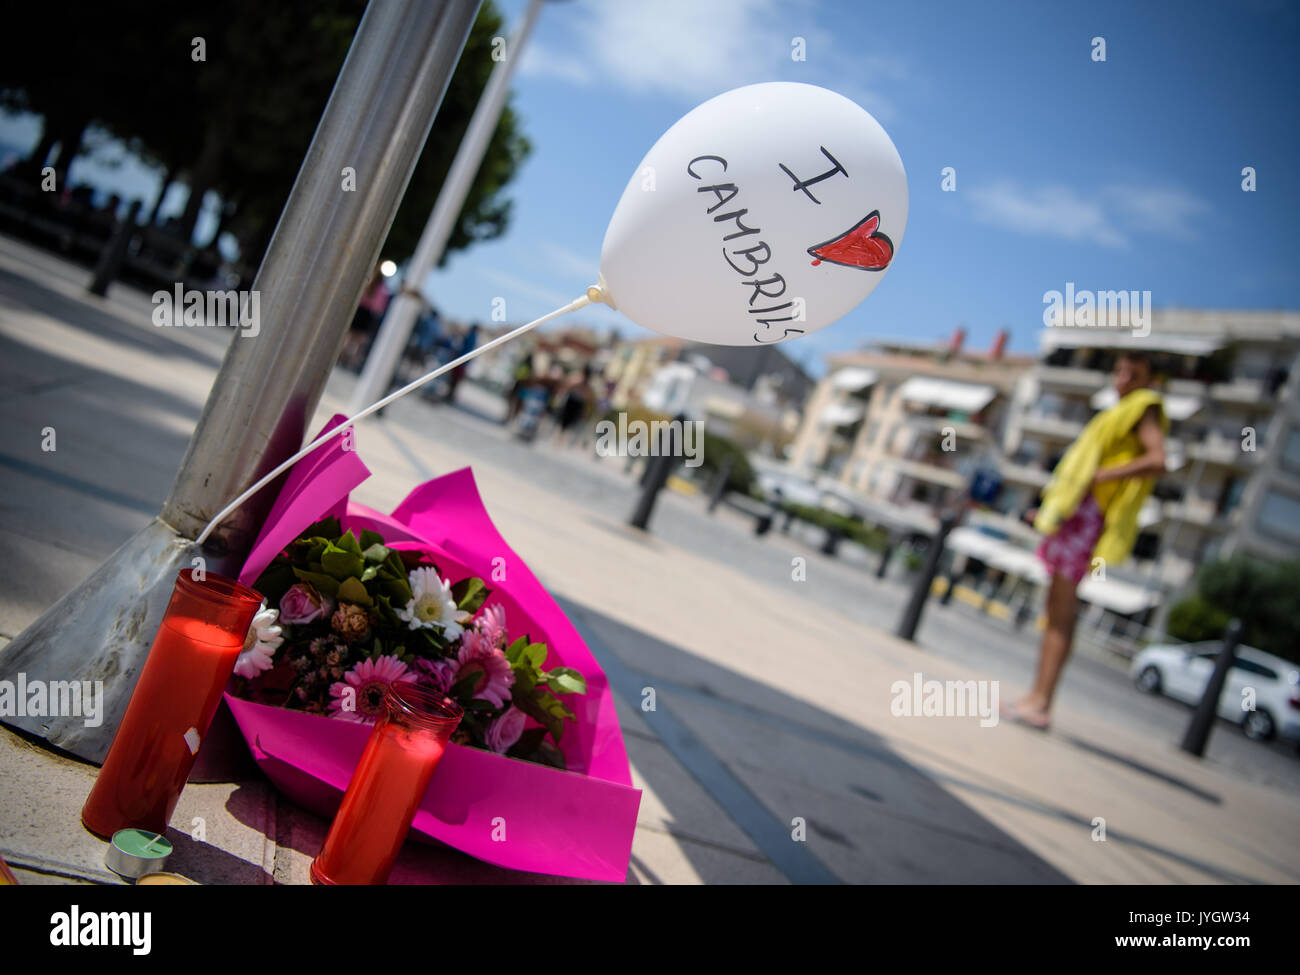 A ballon saying 'I love Cambrils' can be seen next to candles and flowers  on the promenade of Cambrils, Spain, 19 August 2017. In the beach resort  100 kilometres southwest of Barcelona,